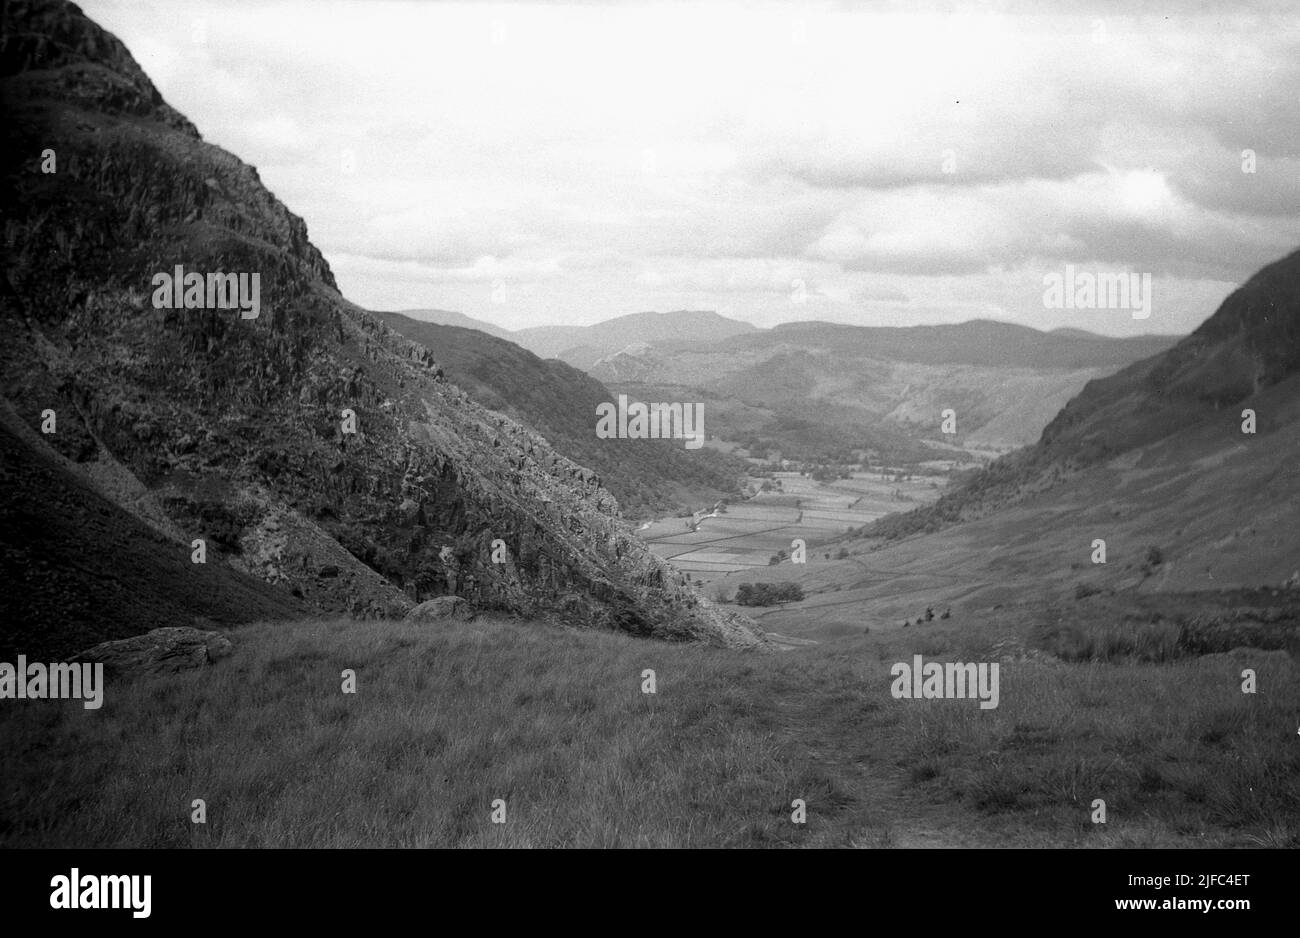 1952, historical view from this era of Borrowdale from the Styhead pass, a mountain pass in the Lake District, Cumbria, England, UK. Stock Photo